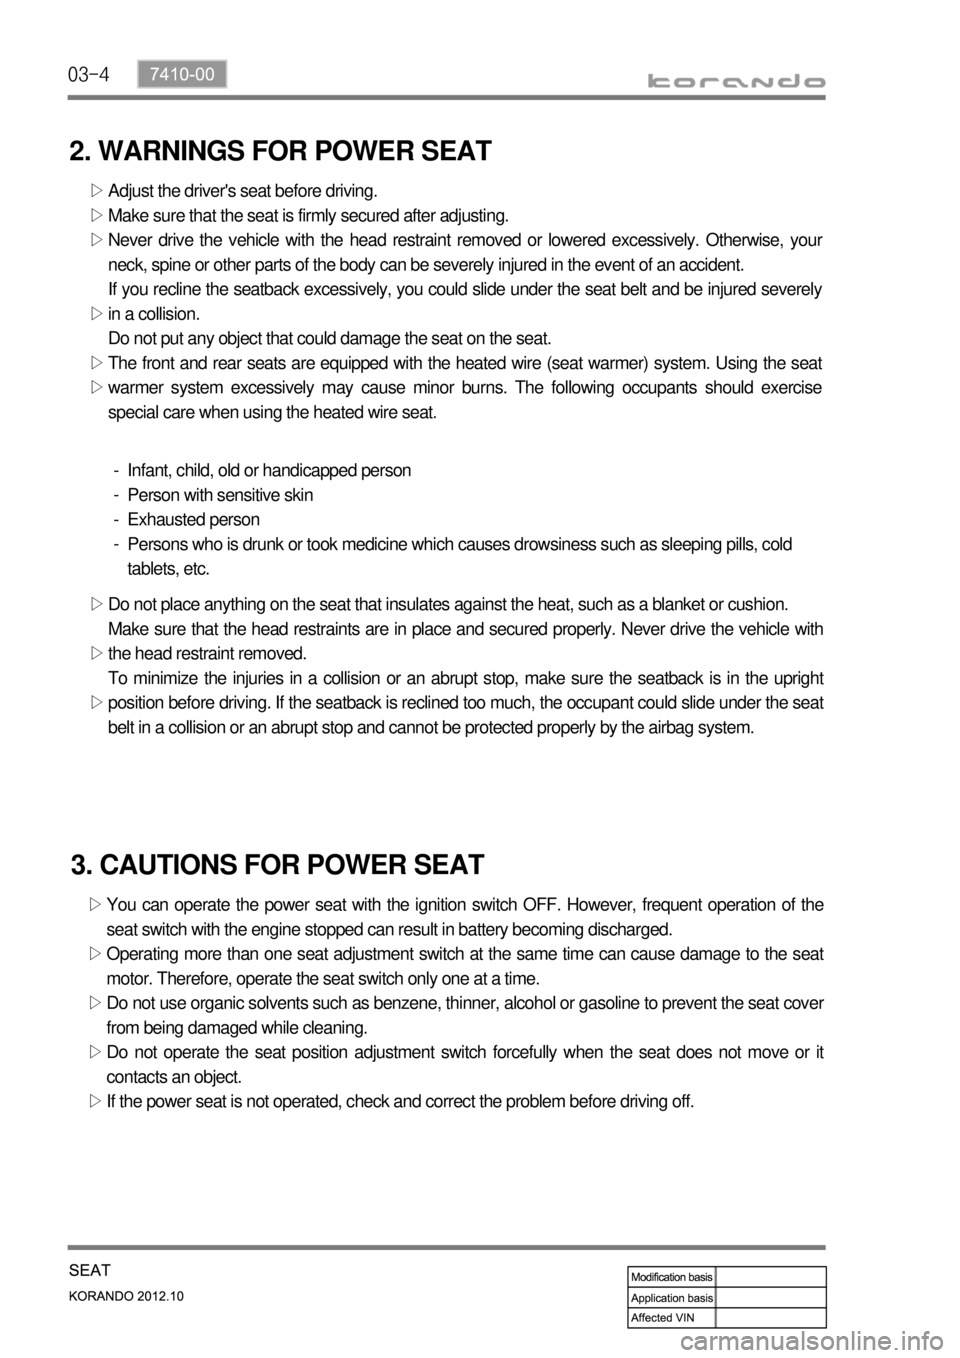 SSANGYONG KORANDO 2012  Service Manual 03-4
2. WARNINGS FOR POWER SEAT
Adjust the drivers seat before driving.
Make sure that the seat is firmly secured after adjusting.
Never drive the vehicle with the head restraint removed or lowered e